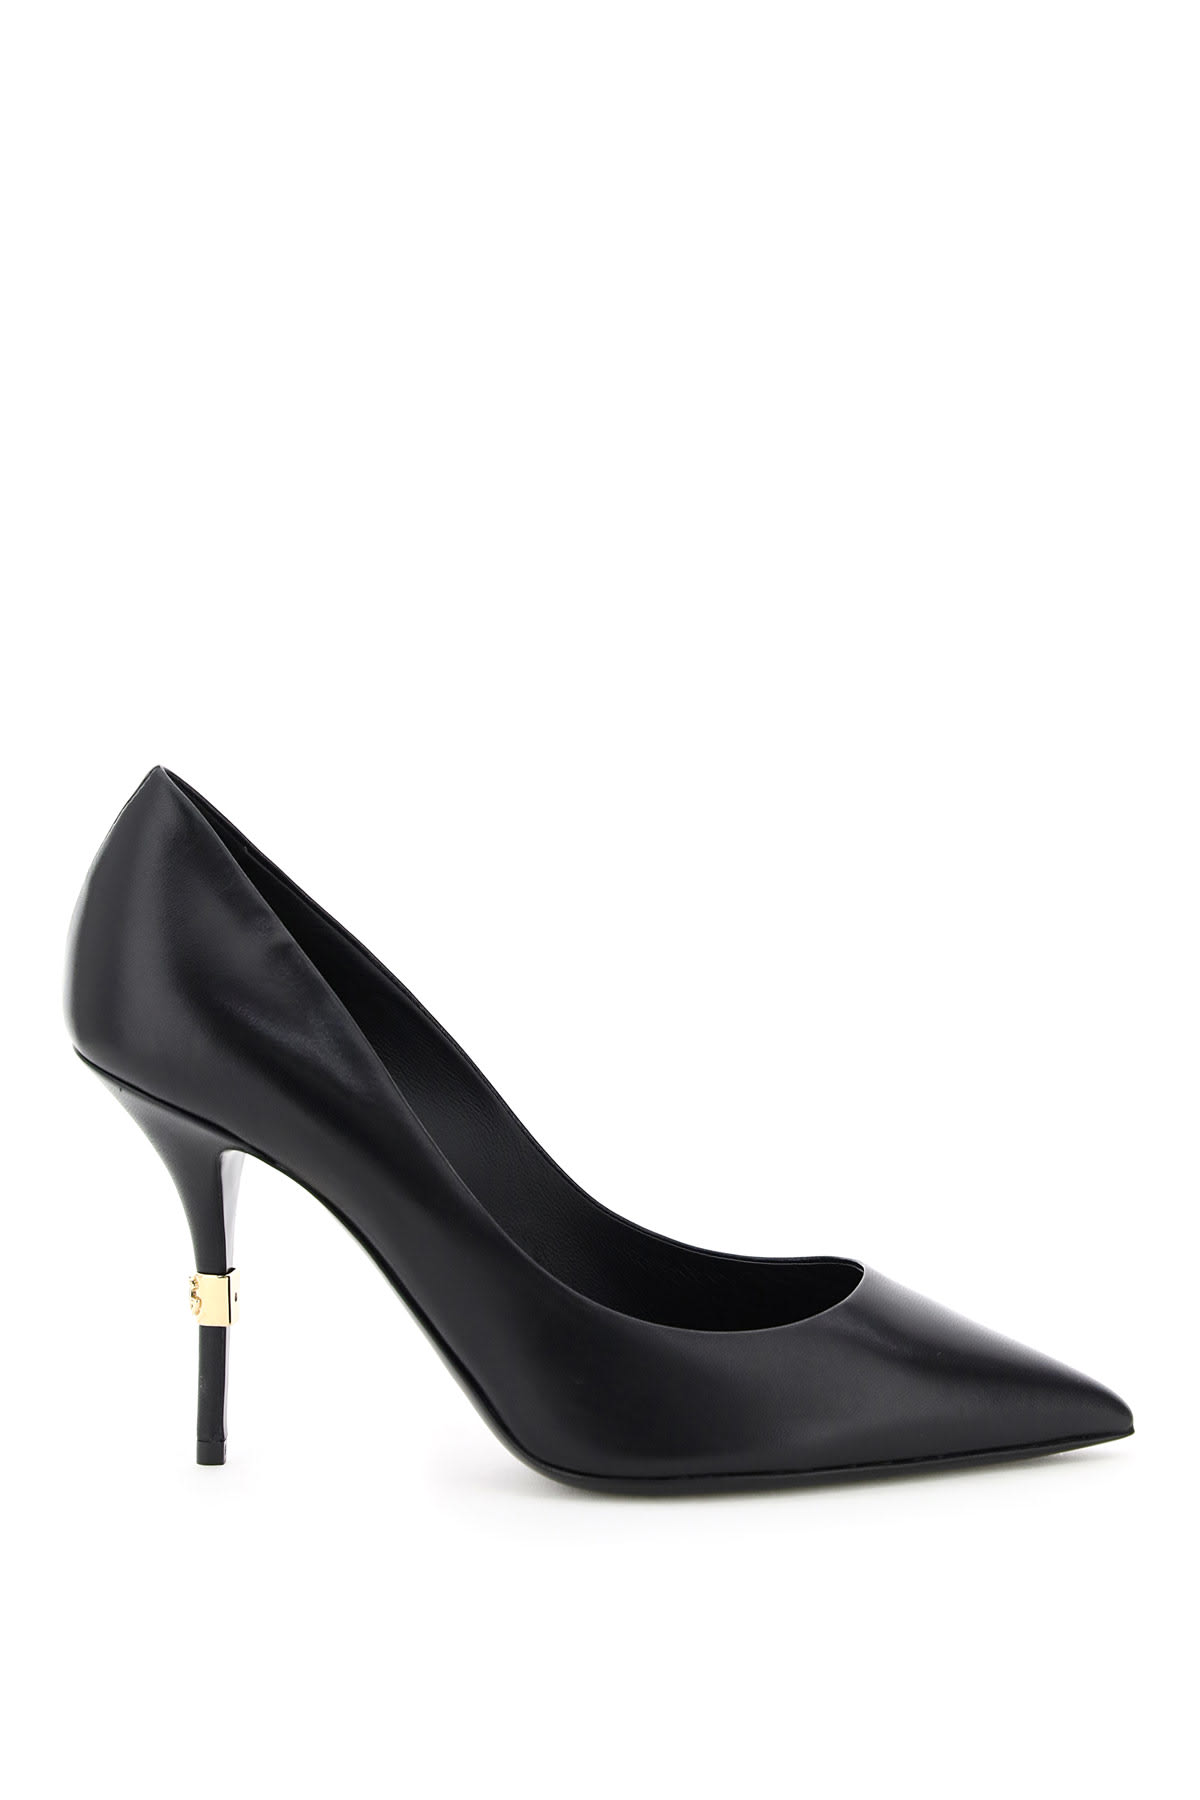 Buy Dolce & Gabbana Cardinale Pumps online, shop Dolce & Gabbana shoes with free shipping